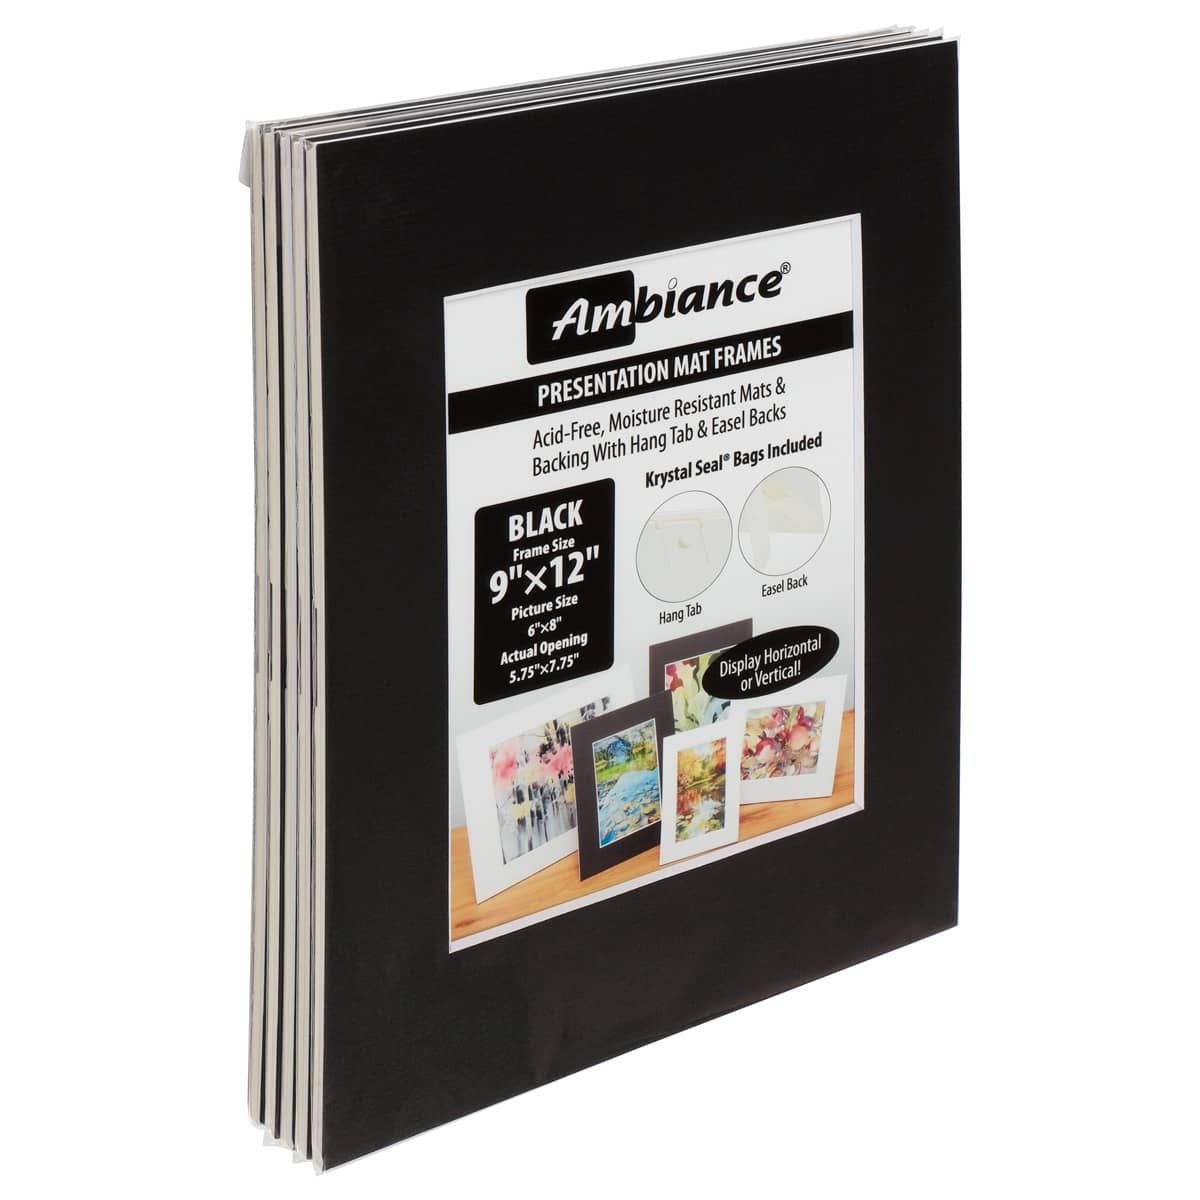 Ambiance 5-Pack Mat Frame 9x12/ 5.75x7.75 Pic Size Black